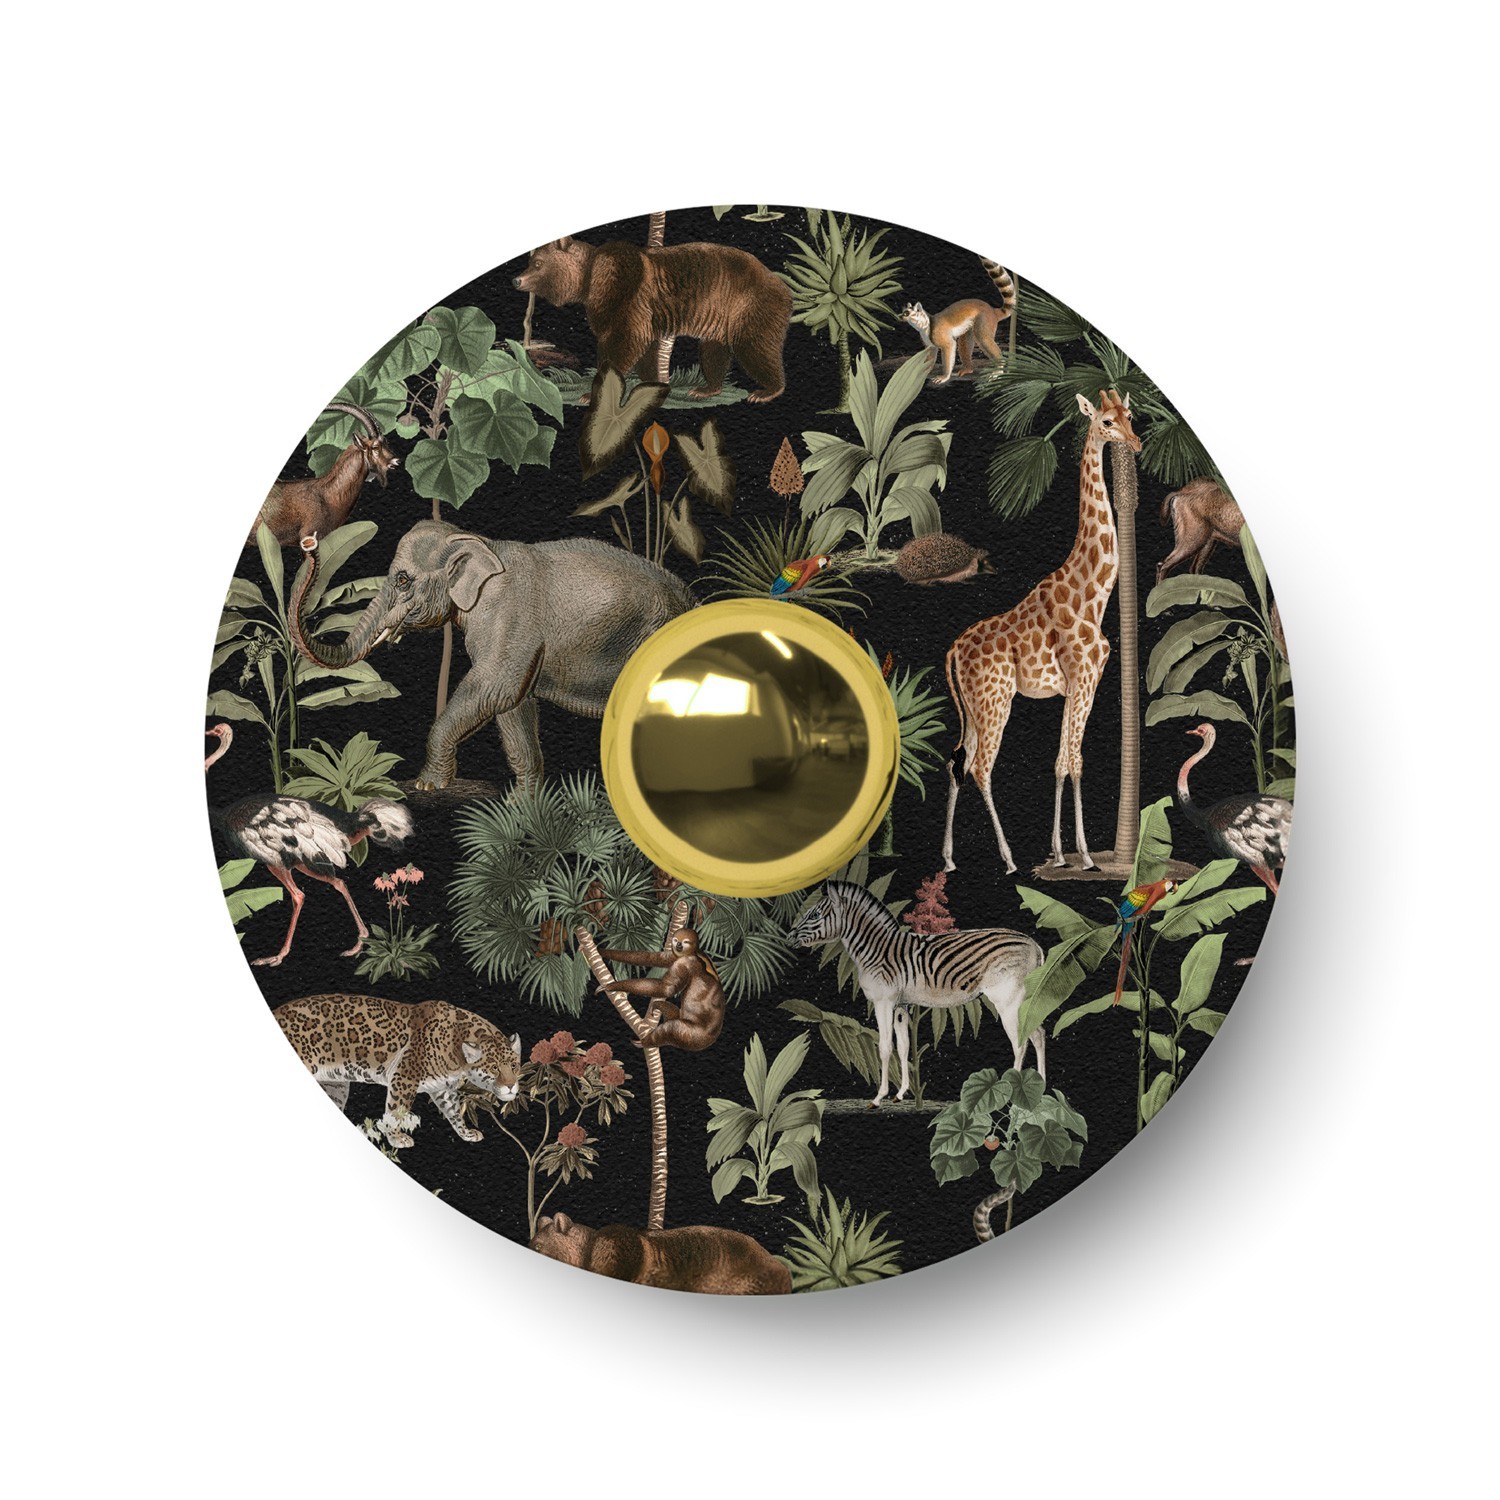 Wall or ceiling lamp with lampshade featuring jungle animals 'Wildlife Whispers' - Waterproof IP44